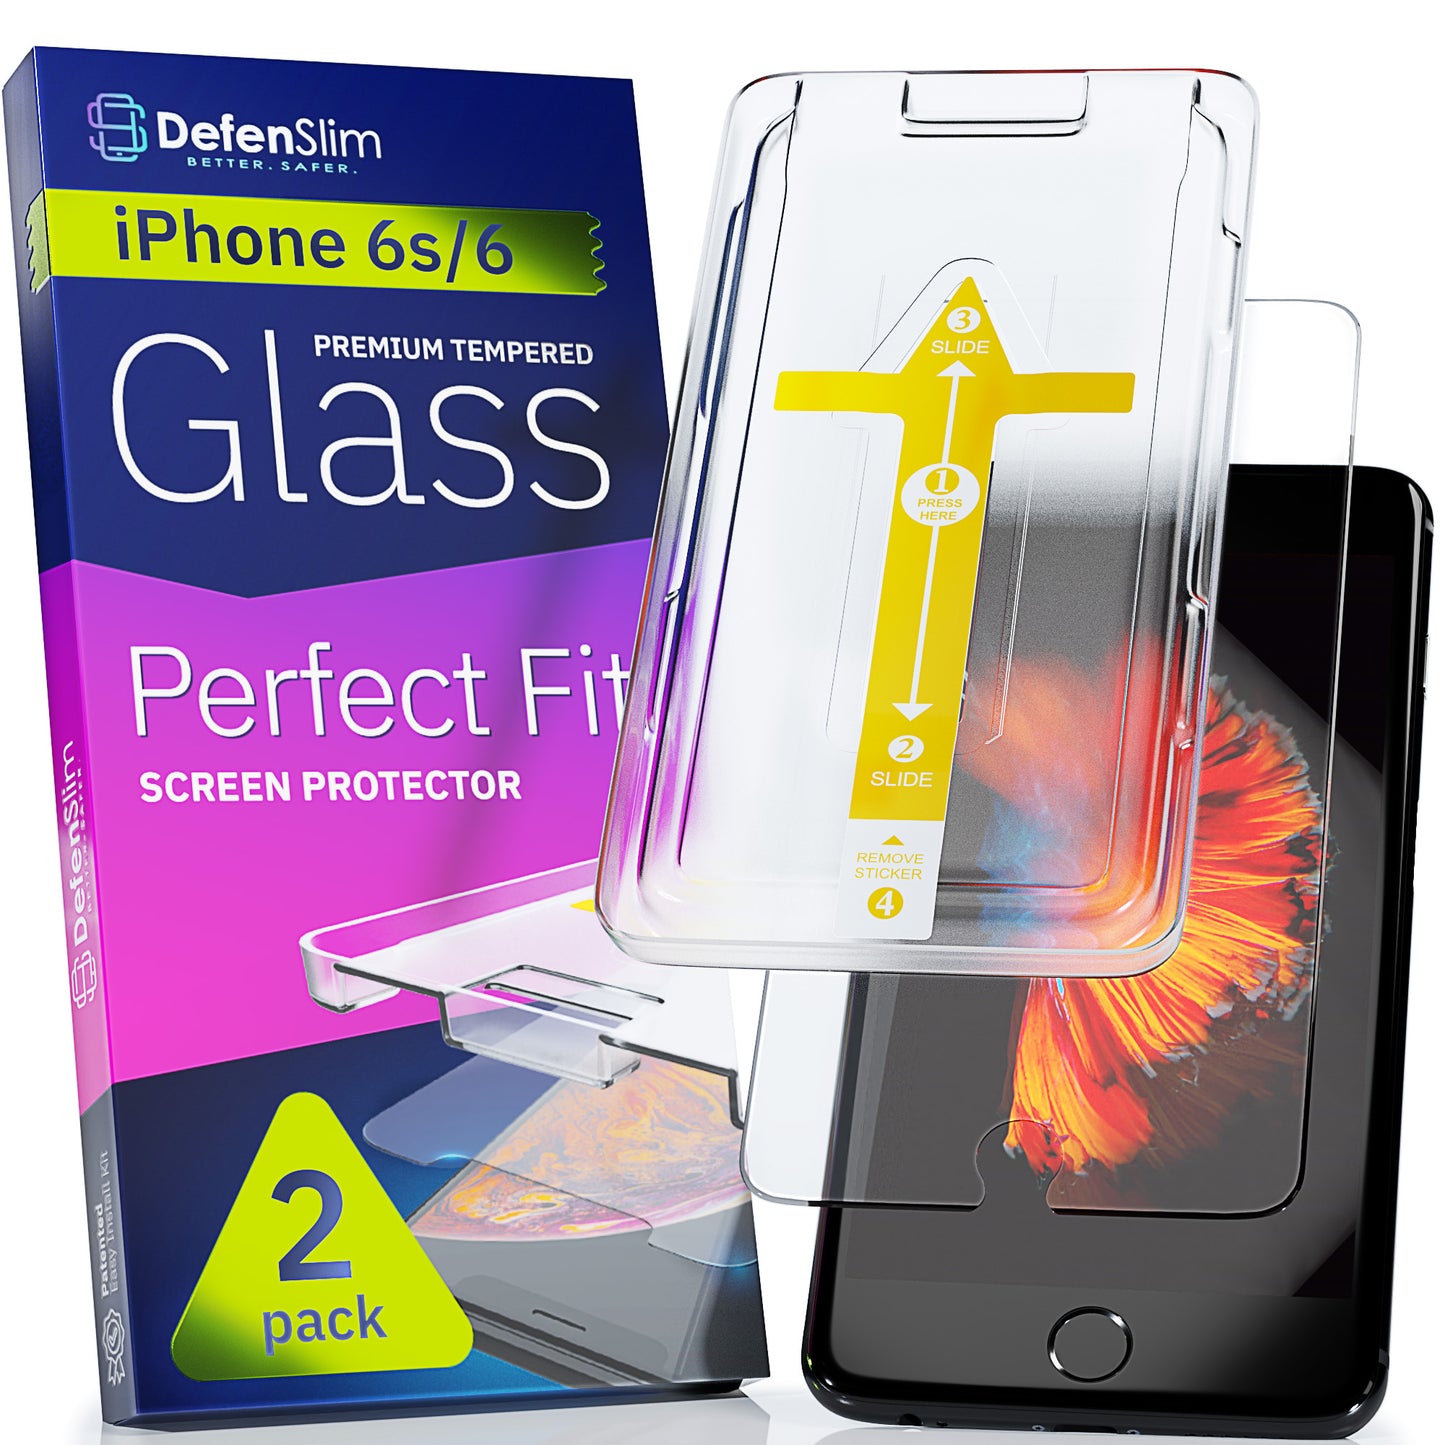 Defenslim iPhone 6s Screen Protector [2-Pack] with Easy Auto-Align Install Kit